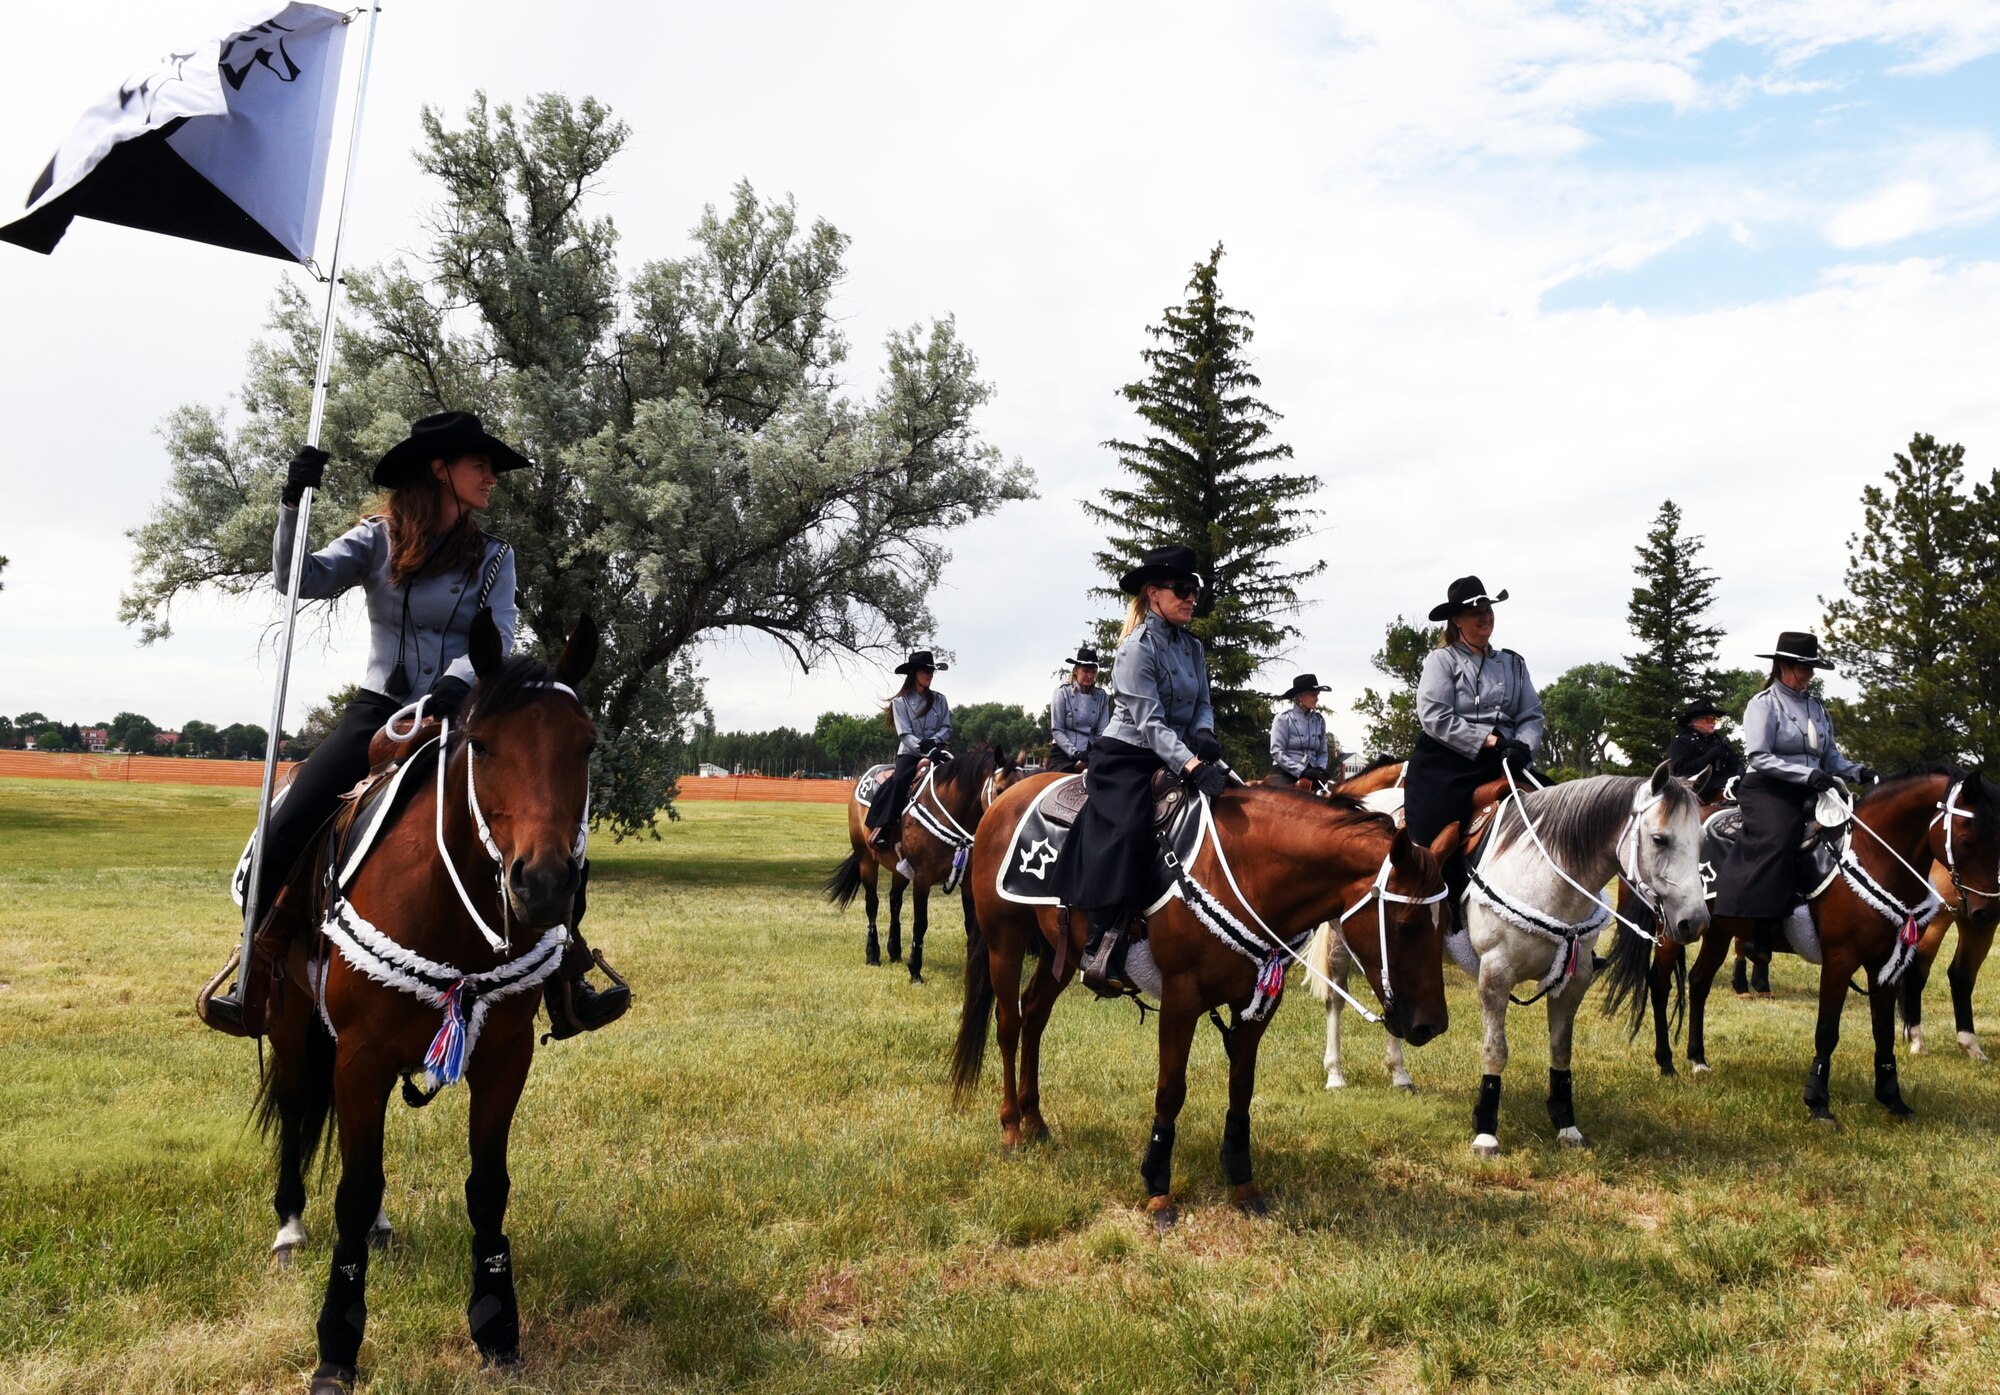 Members of the Trotters team showcase their skills during Fort D.A. Russell Days, the annual open house on F.E. Warren Air Force Base, Wyo., July 20, 2019. The Trotters perform each year during Fort D.A. Russell Days. The open house gives the community a peek into the history of the base and its role within the nation’s defense. (U.S. Air Force photo by Senior Airman Breanna Carter)